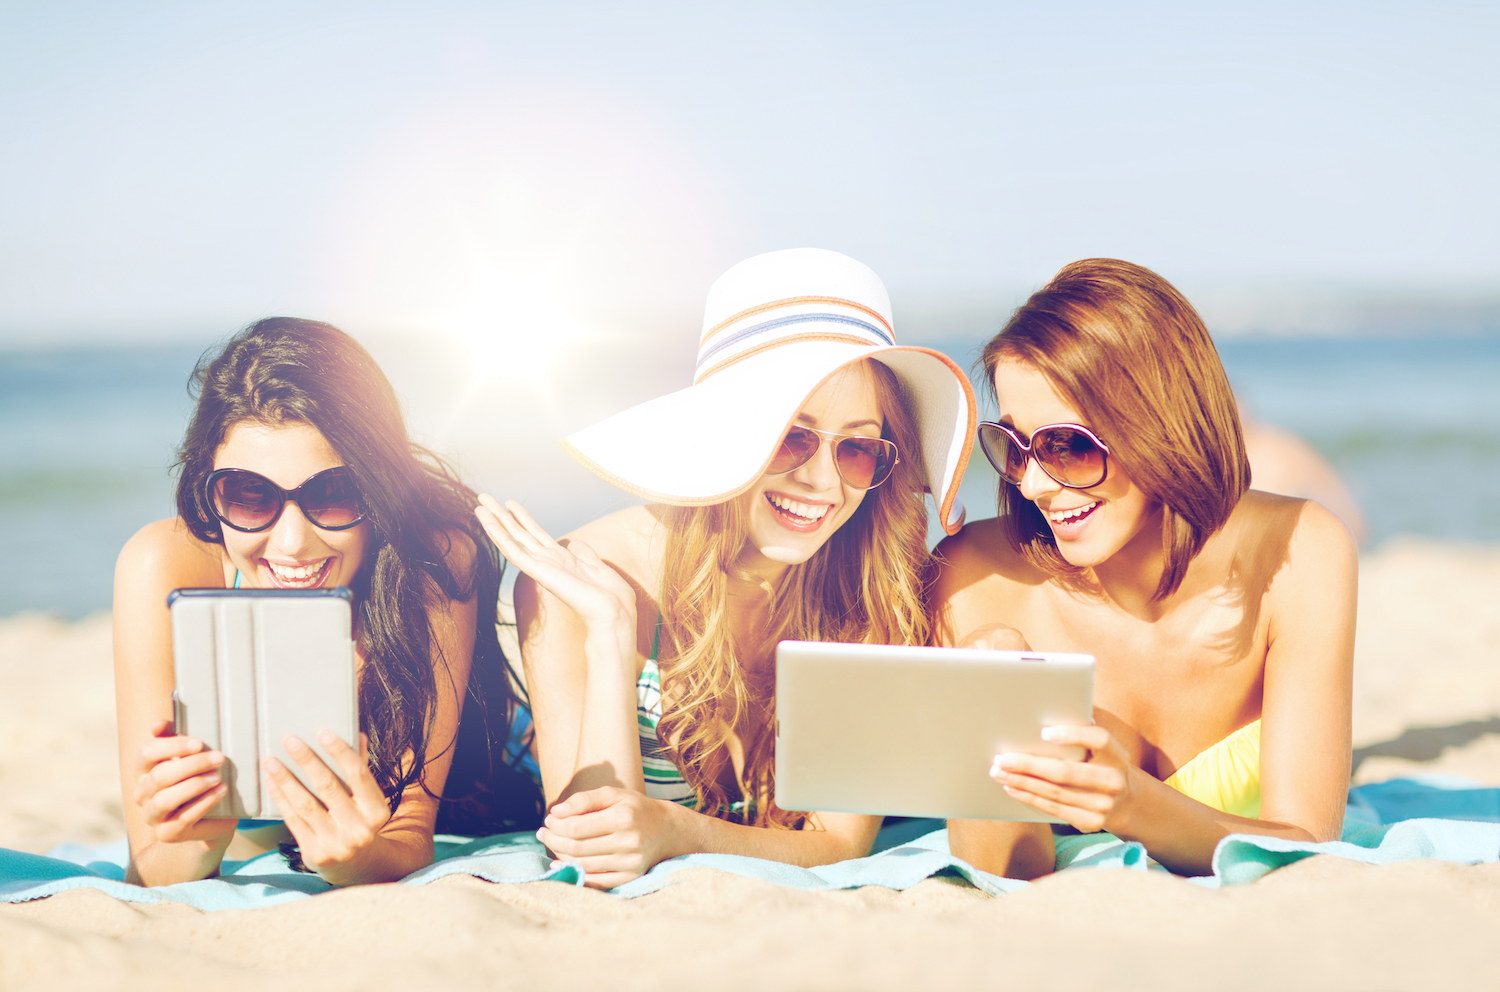 Friends on the beach with tablets from shutterstock